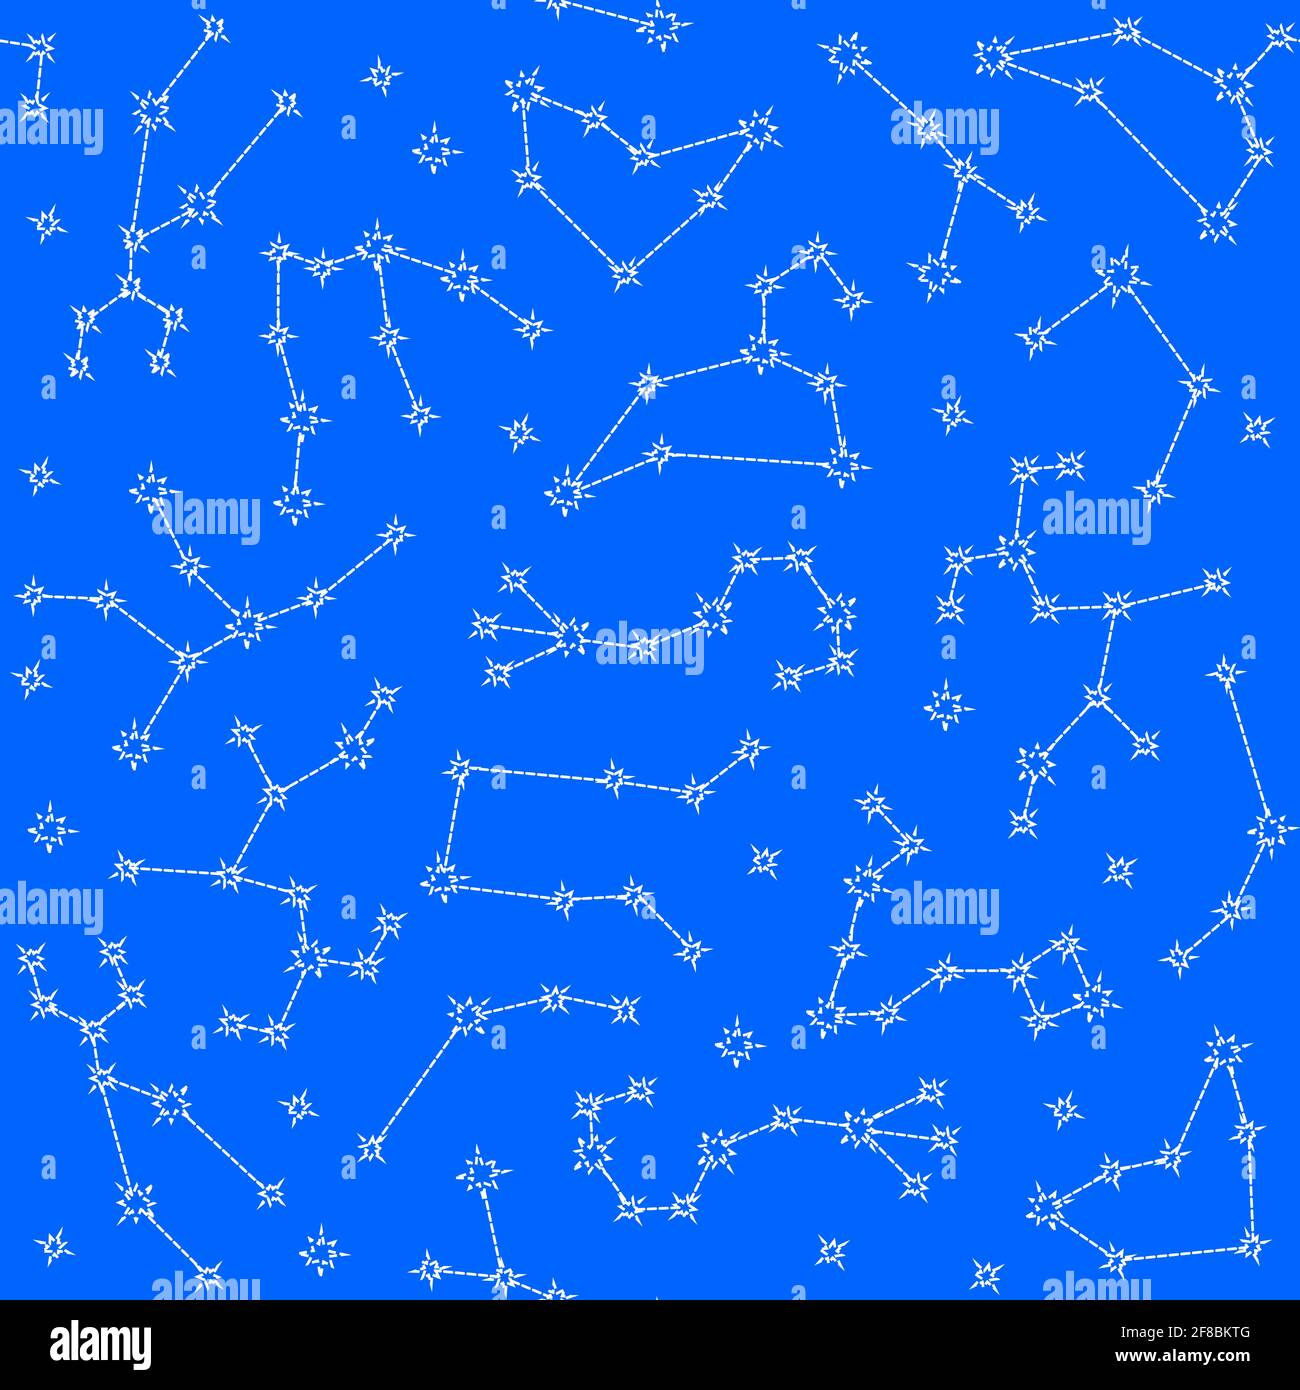 Astrology seamless pattern with zodiac constellation symbols. Repeatable background with connected shining star signs. Vector illustration. Stock Vector